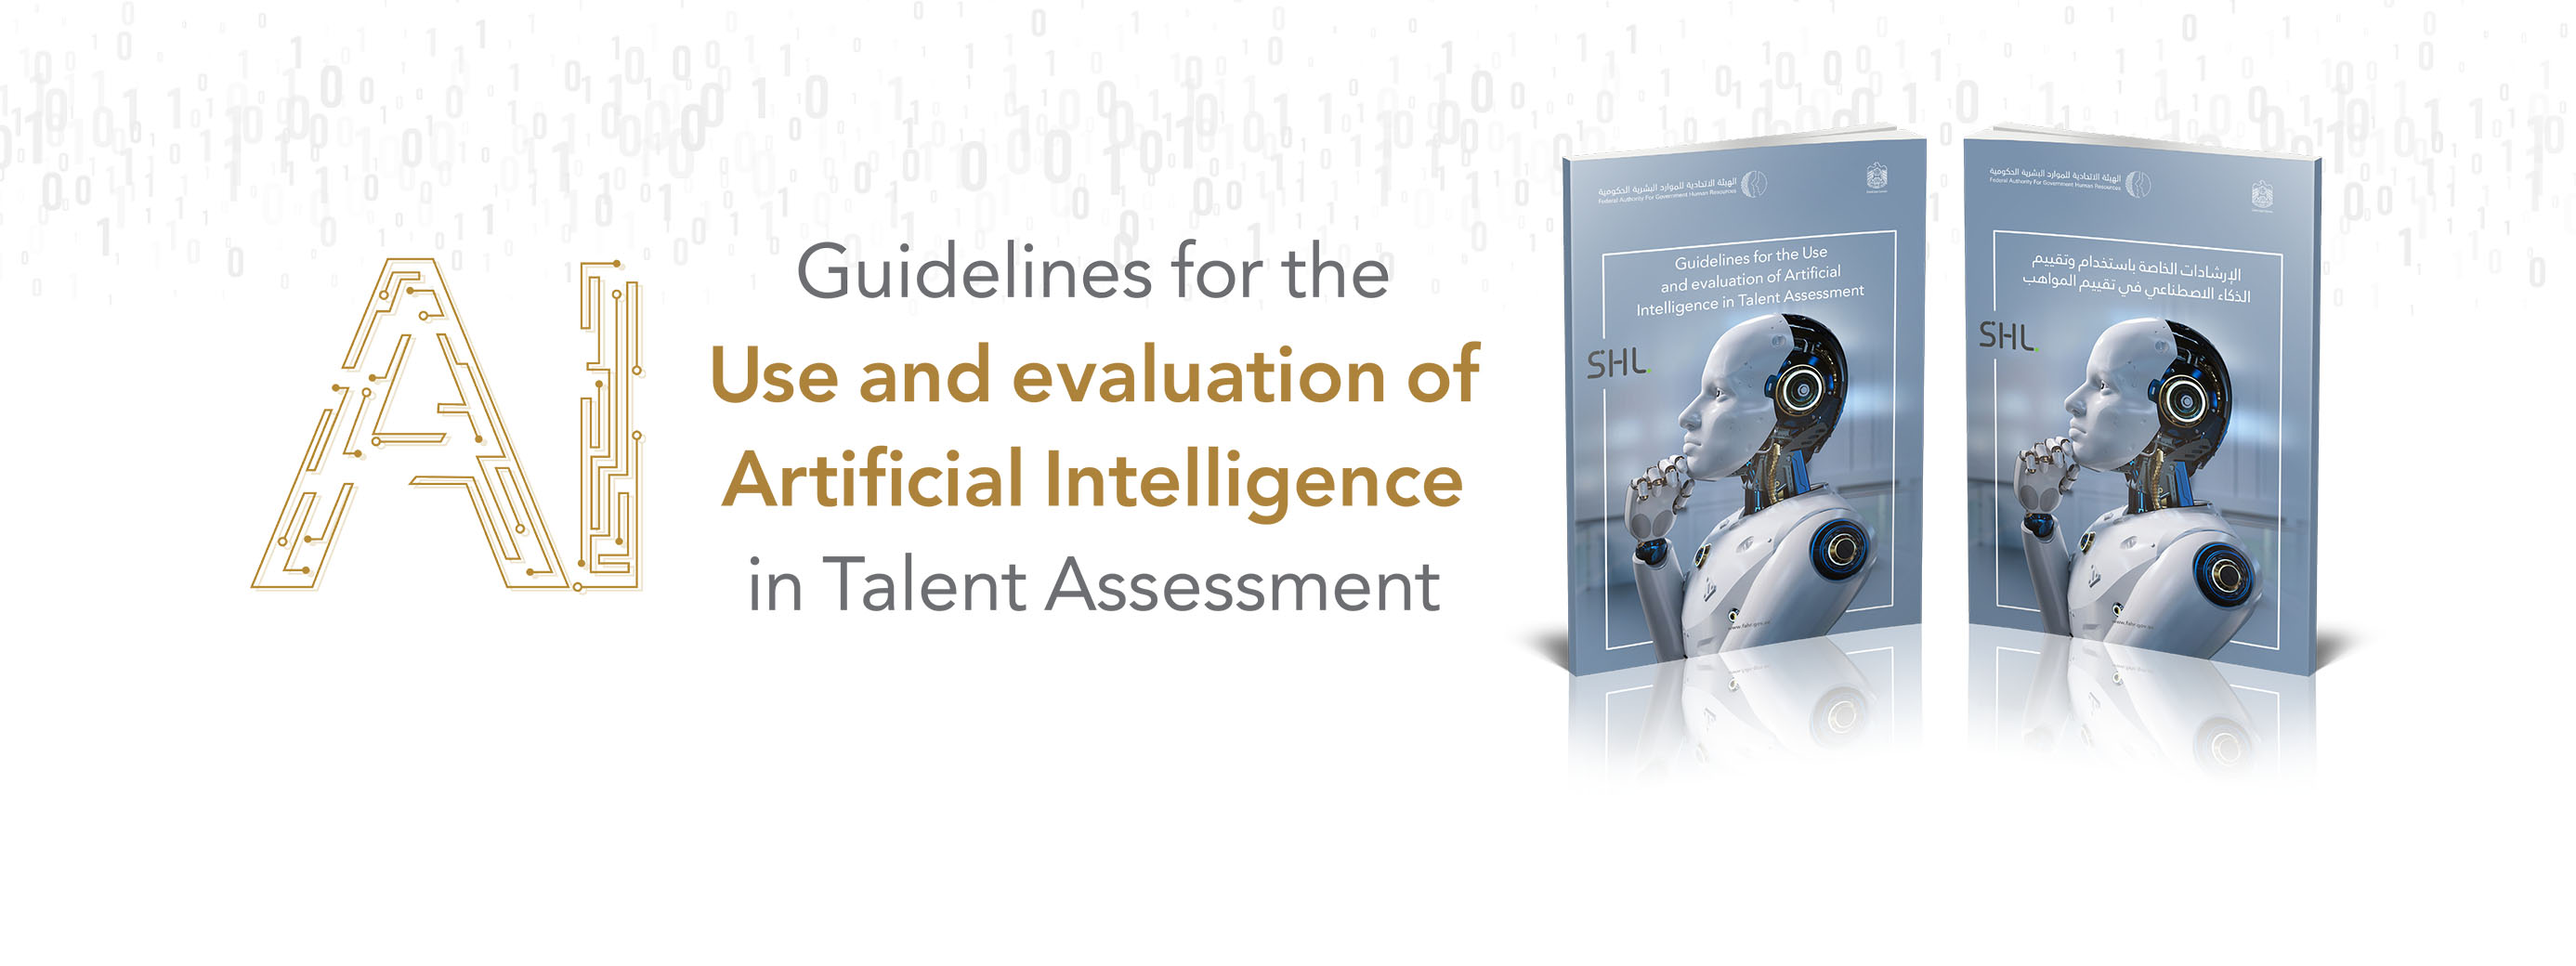 Guidelines for the Use and evaluation of Artificial Intelligence in Talent Assessment